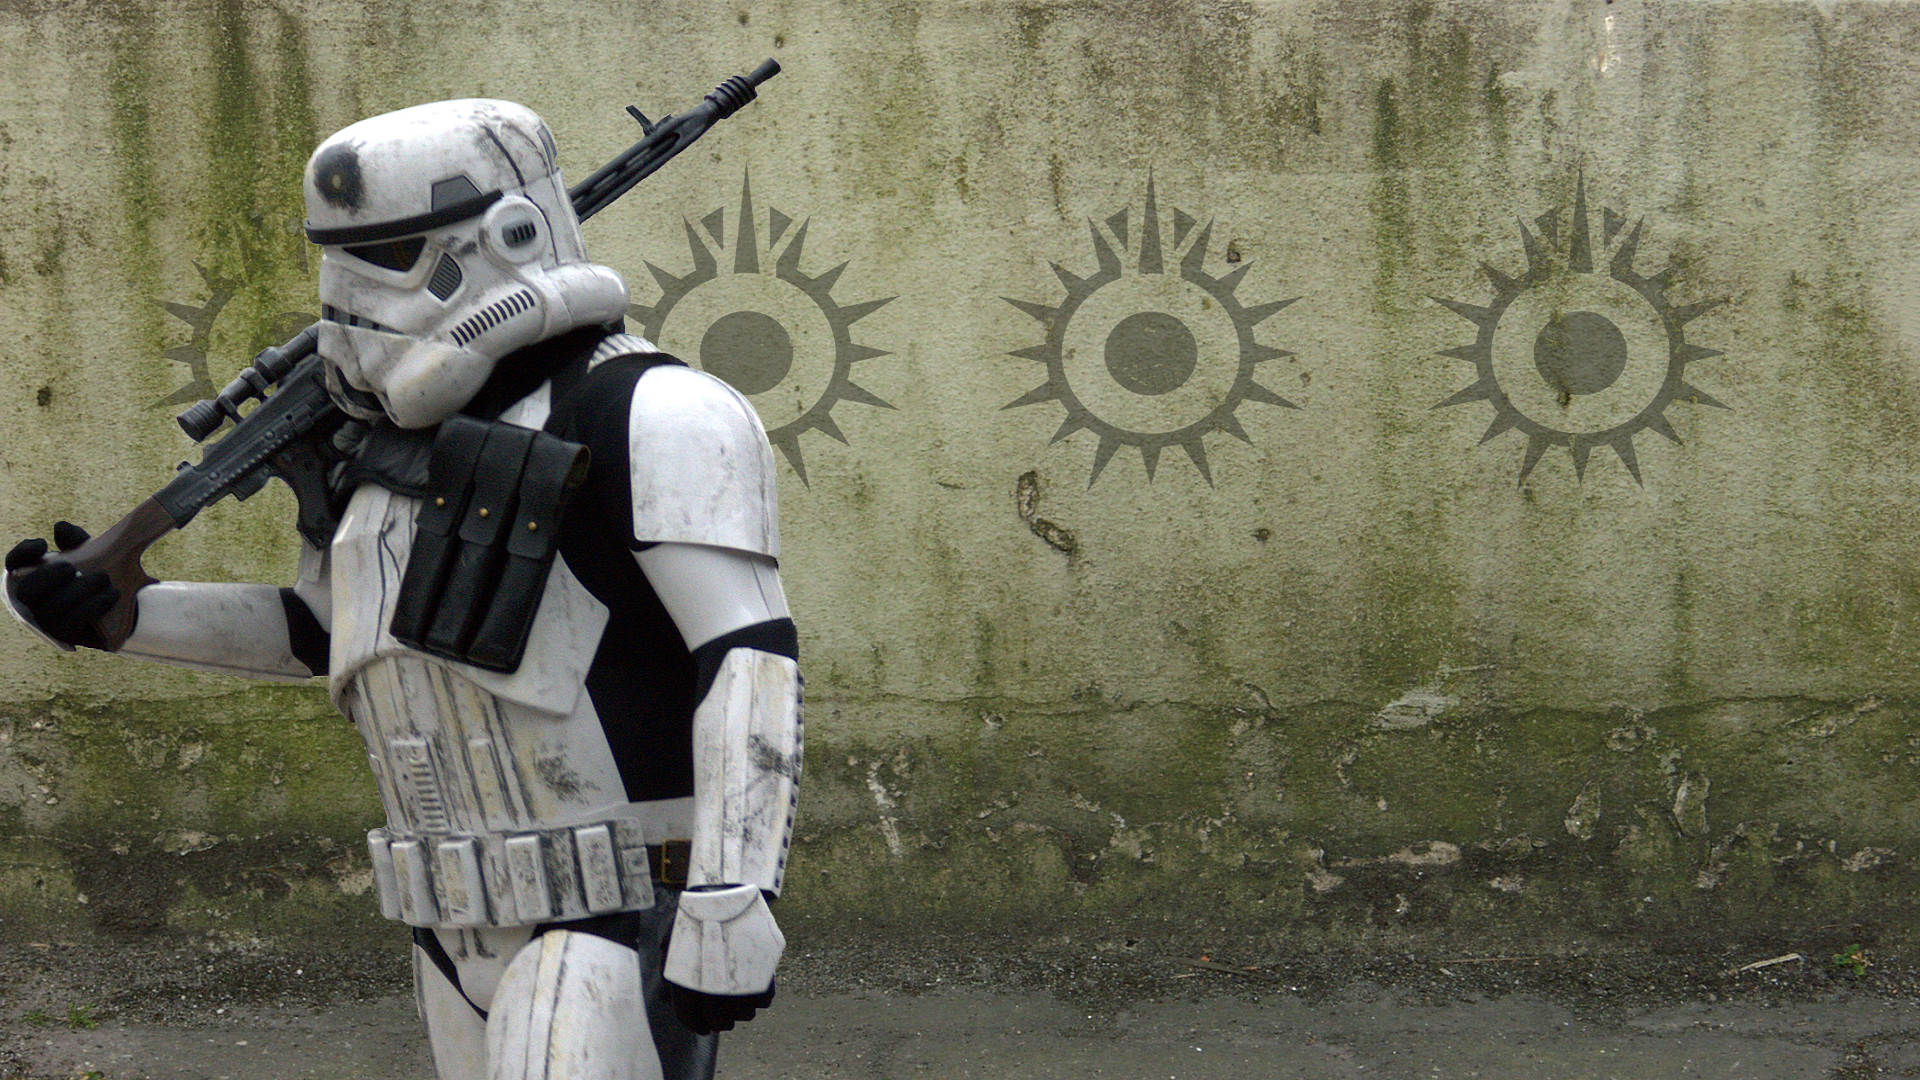 General 1920x1080 Star Wars cosplay stormtrooper Imperial Stormtrooper Imperial Forces wall weapon